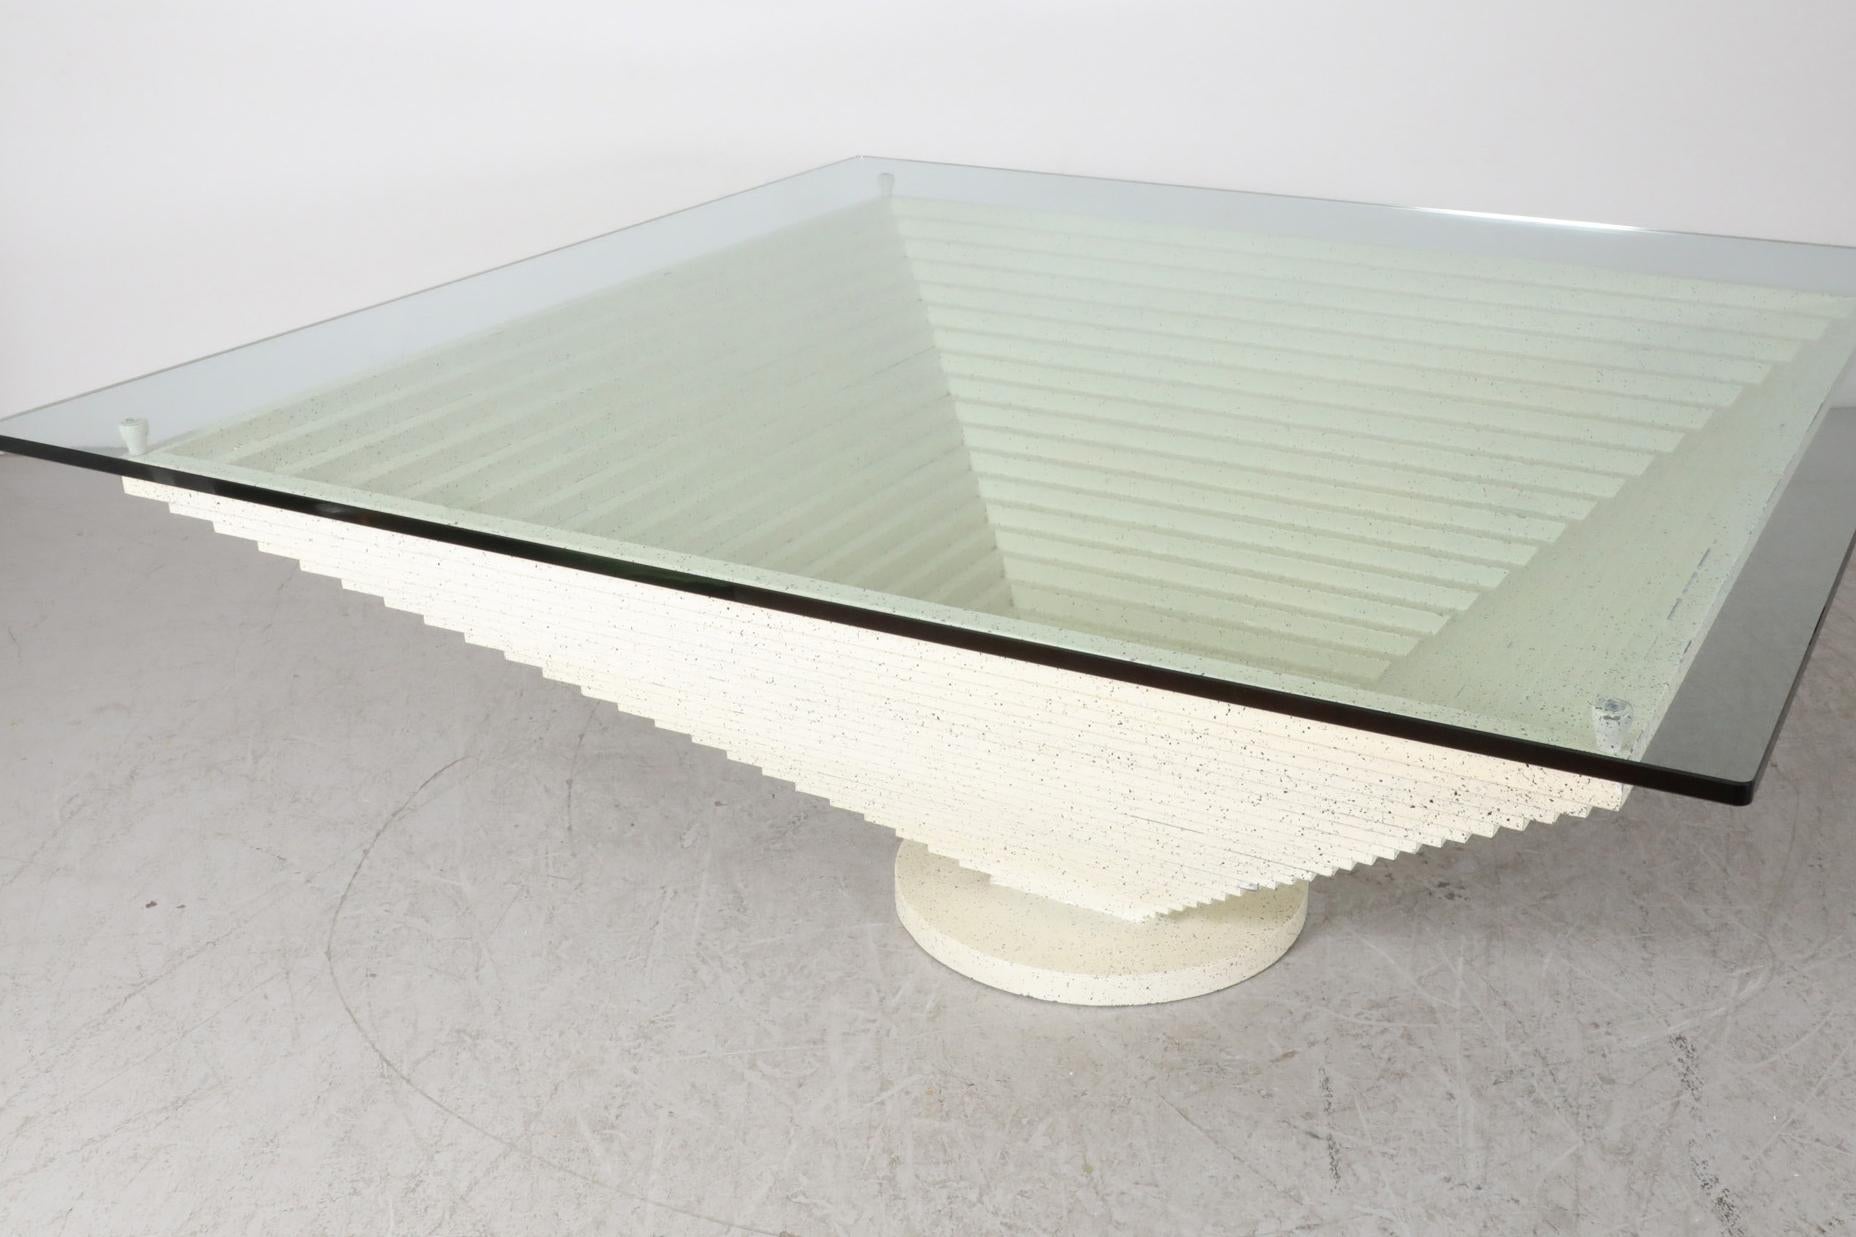 Enameled Giant Modernist Memphis Speckled Cream & Black Pyramid Table w/ Glass Top, 1980s For Sale